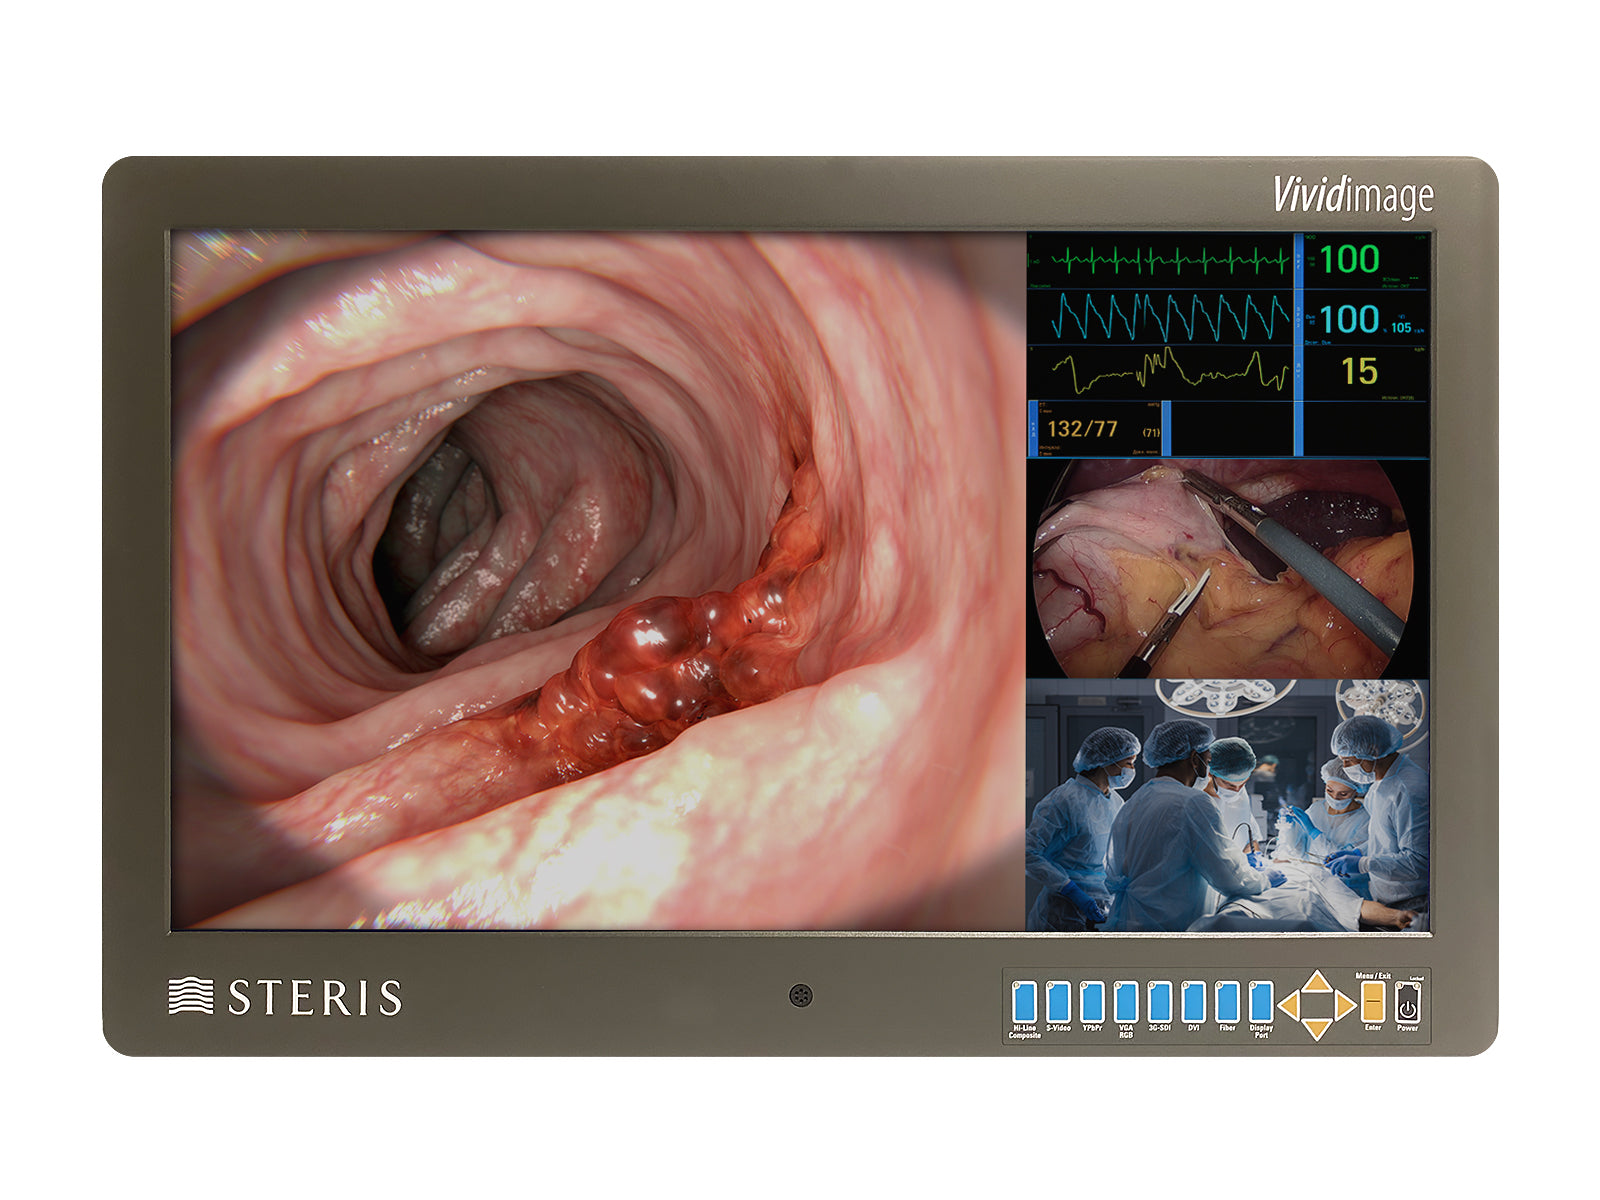 Steris Vividimage STERIS-27-HDD-R 27" Color Surgical Display Monitor (RLM27HDNPWR)